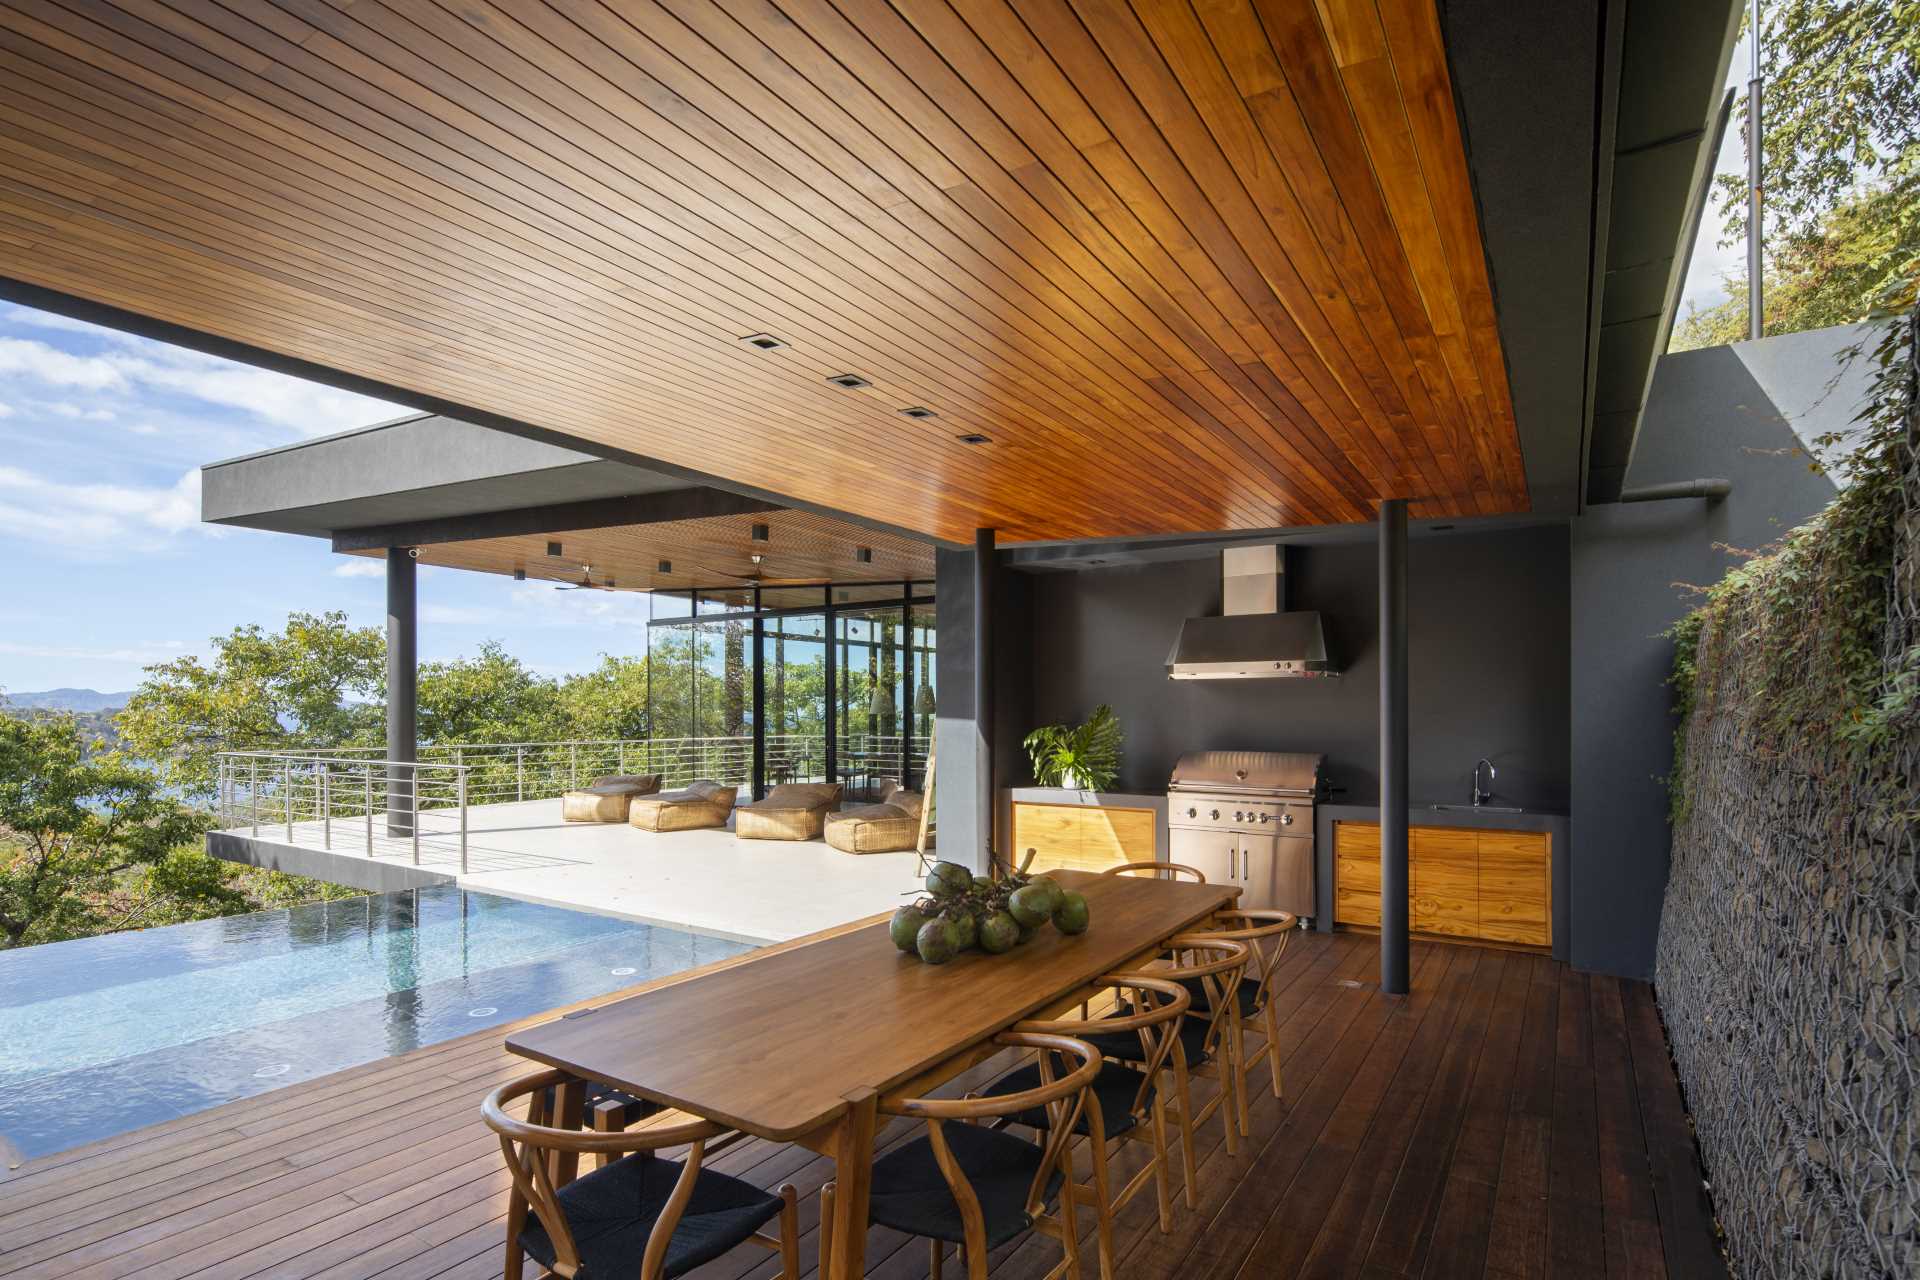 A modern home has covered area by the pool for outdoor dining and an outdoor kitchen.